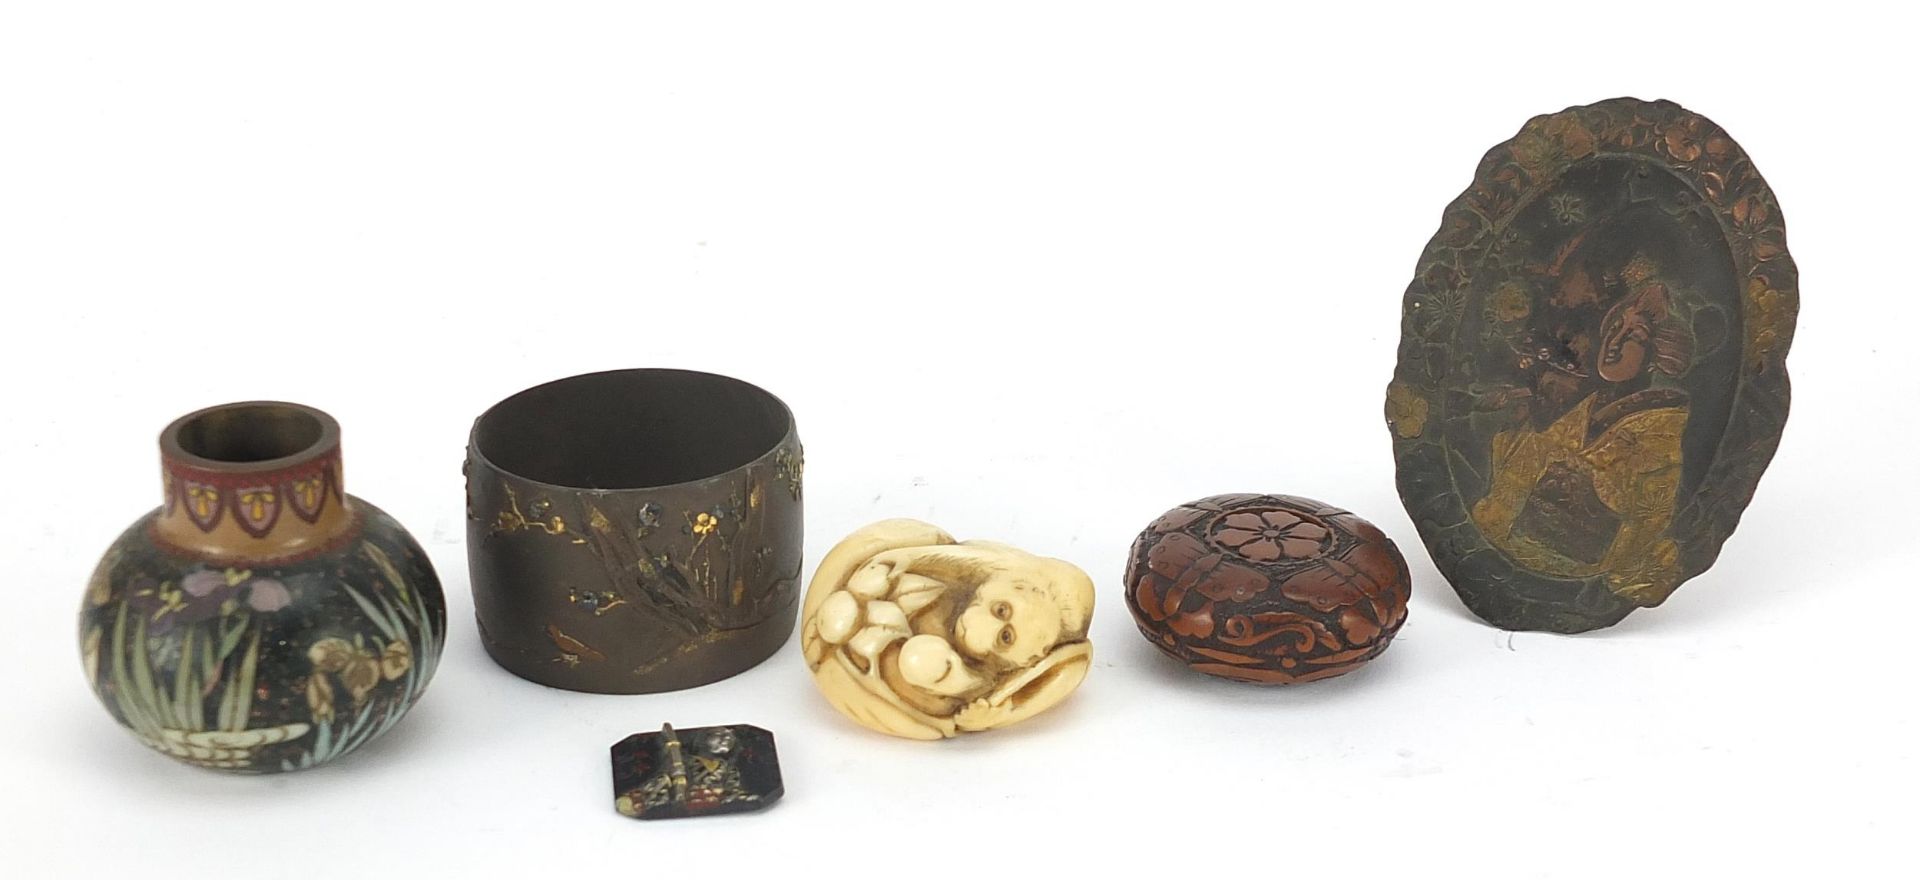 Japanese objects including an ivory toggle, mixed metal napkin ring and cloisonne vase, the